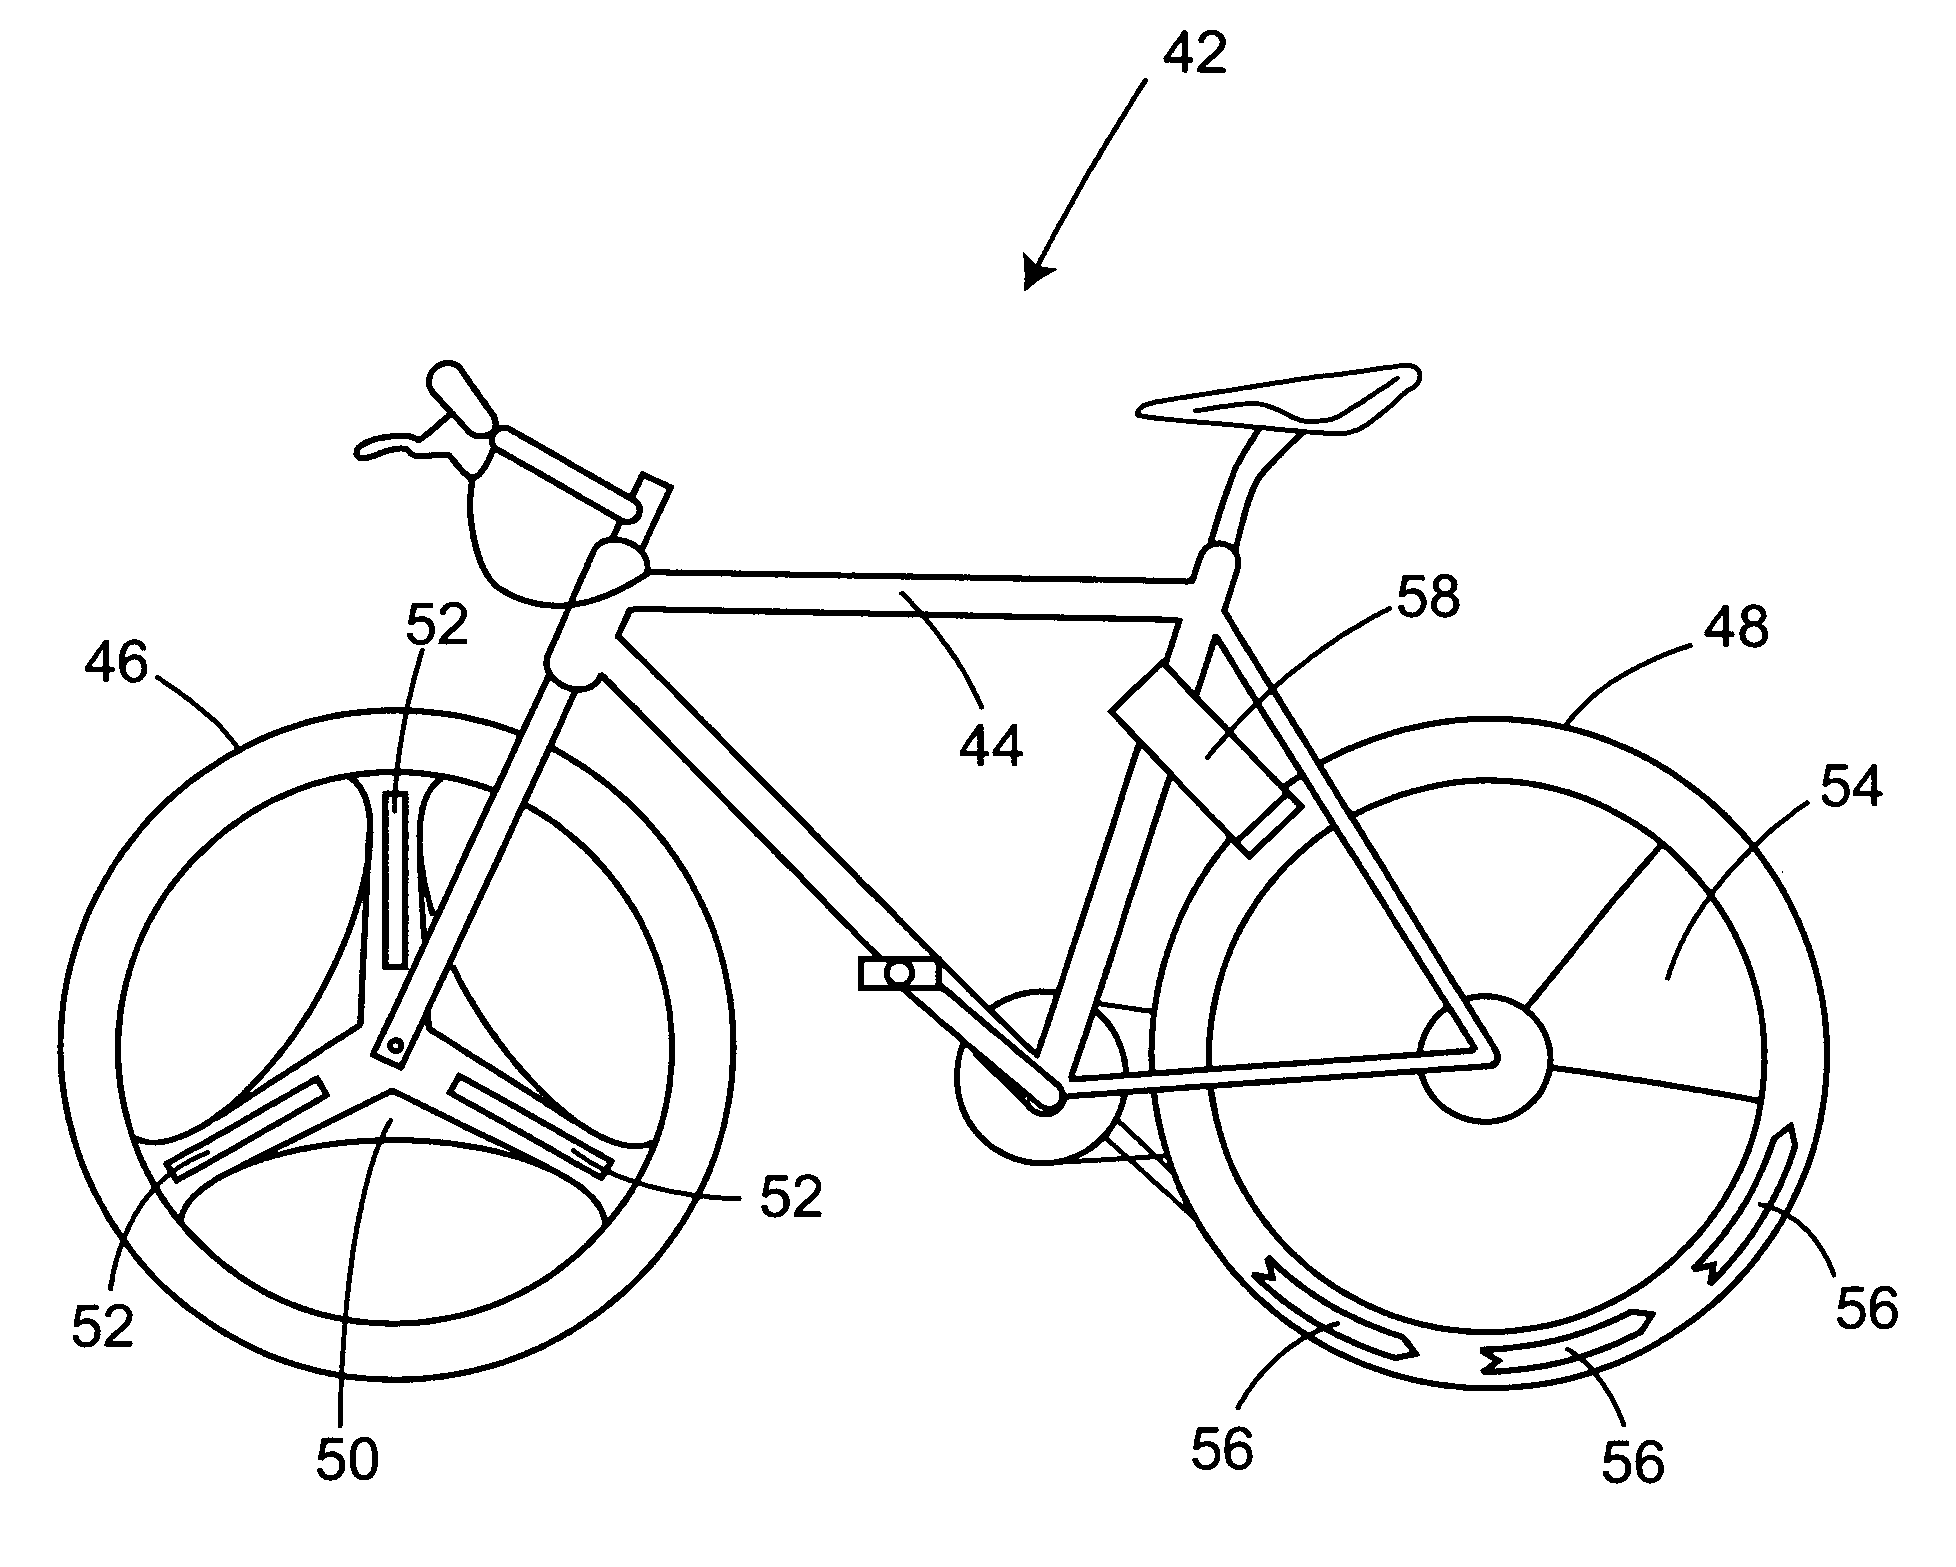 Human powered vehicle safety lighting structures